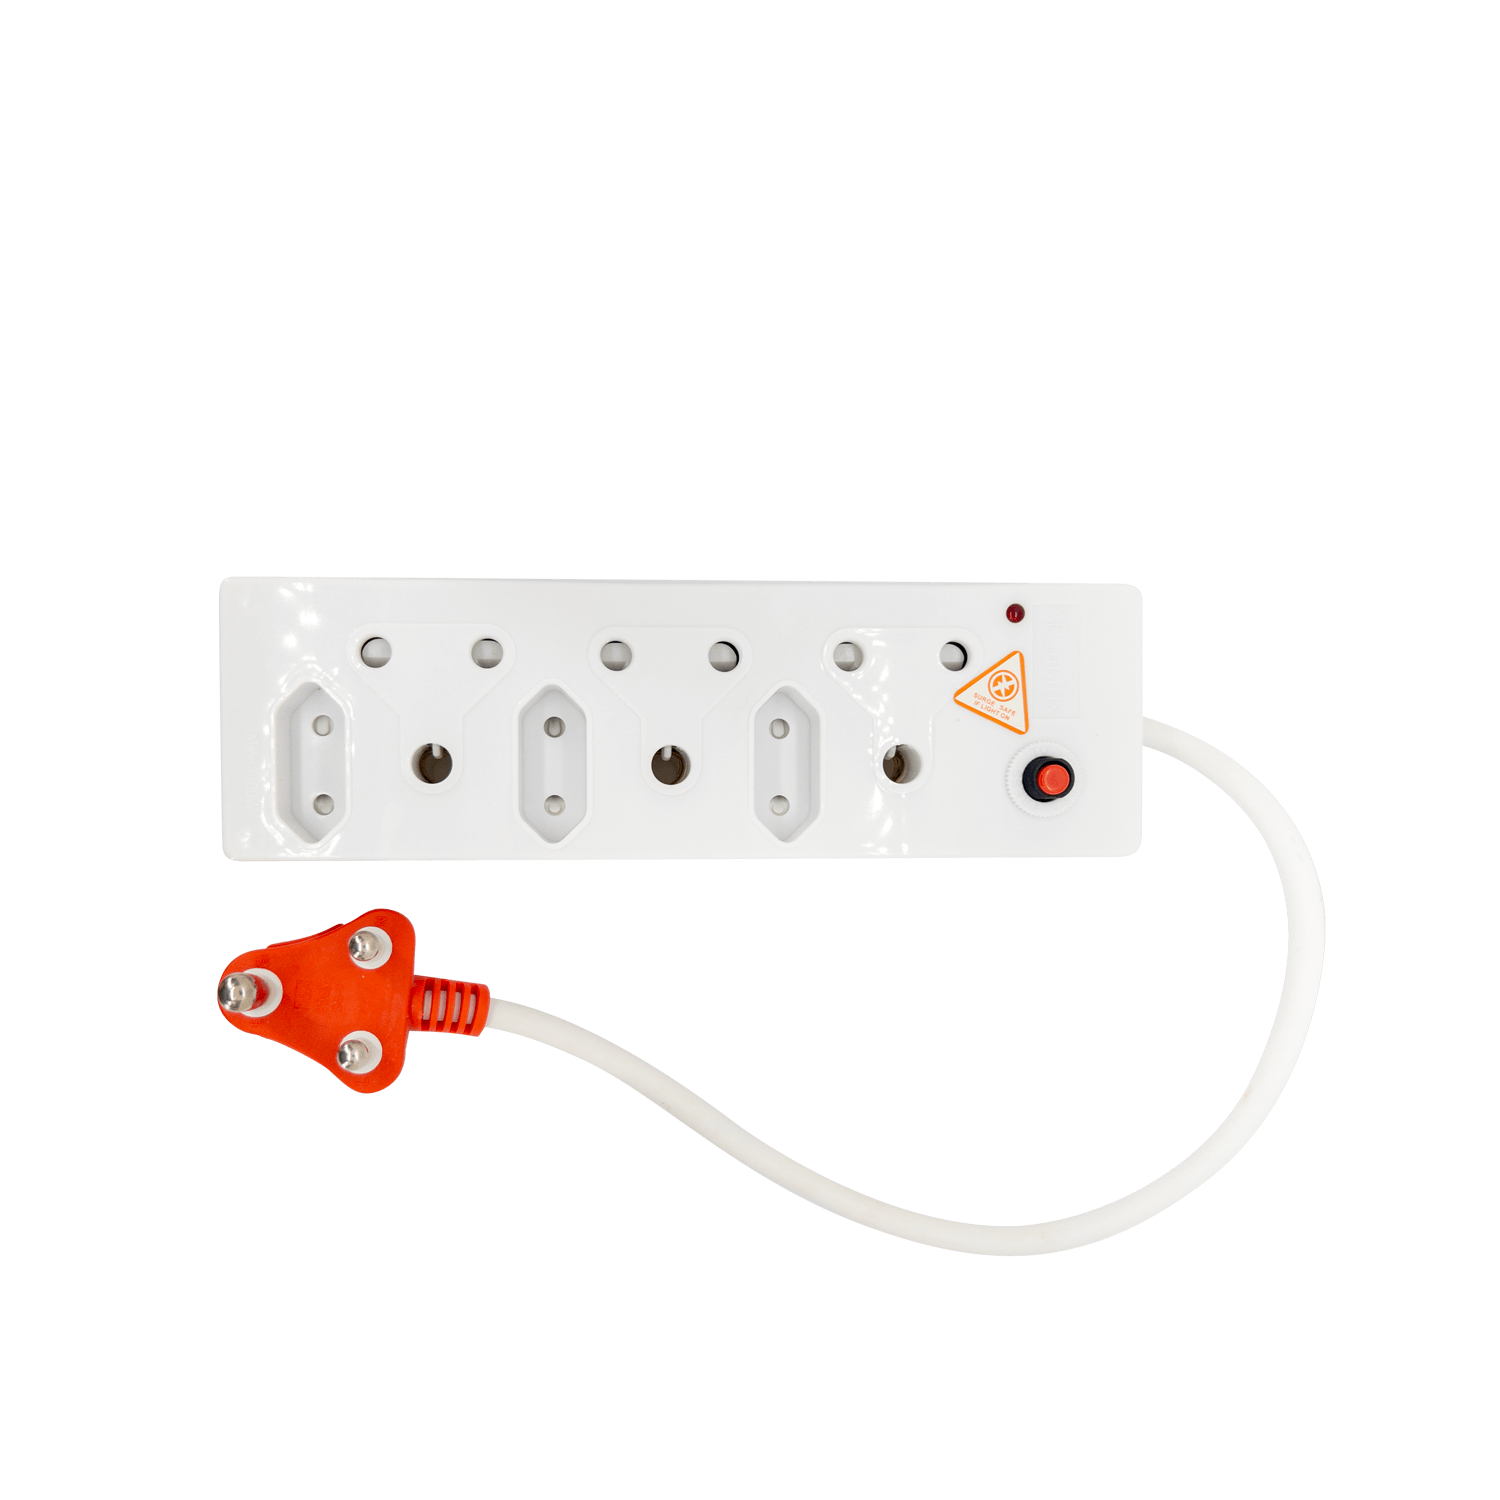 6 Way Multiplug with Surge Protection